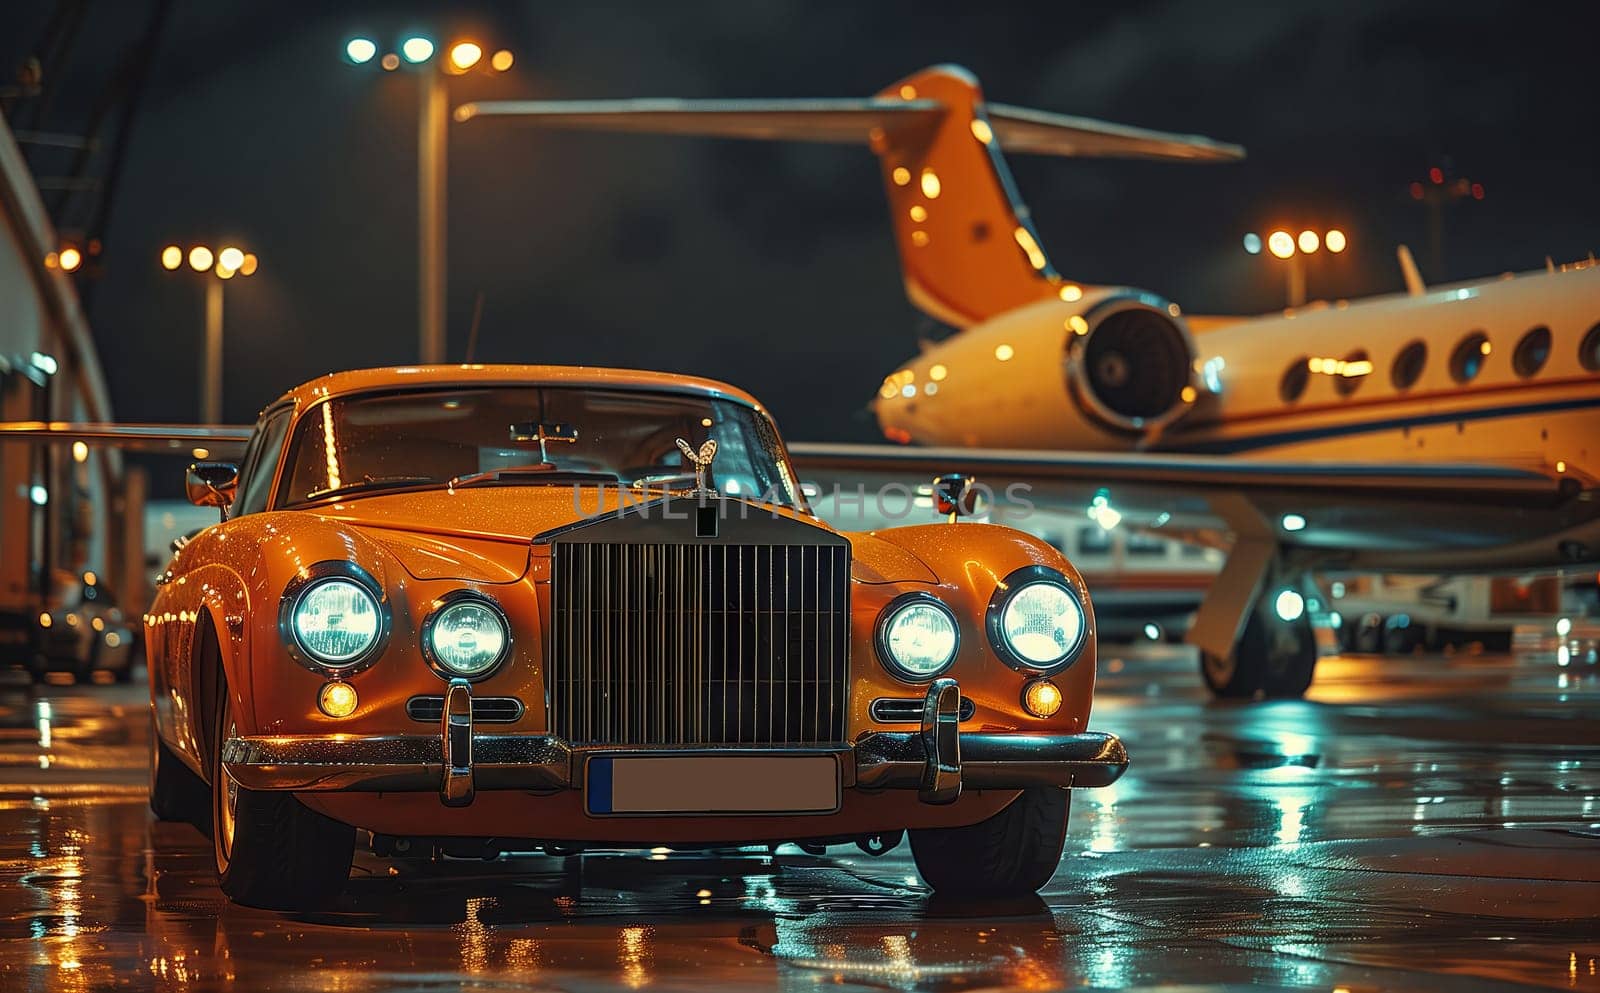 A luxurious Rolls Royce car is parked next to a sleek private jet under the street light. The vehicle registration plate gleams in the automotive lighting